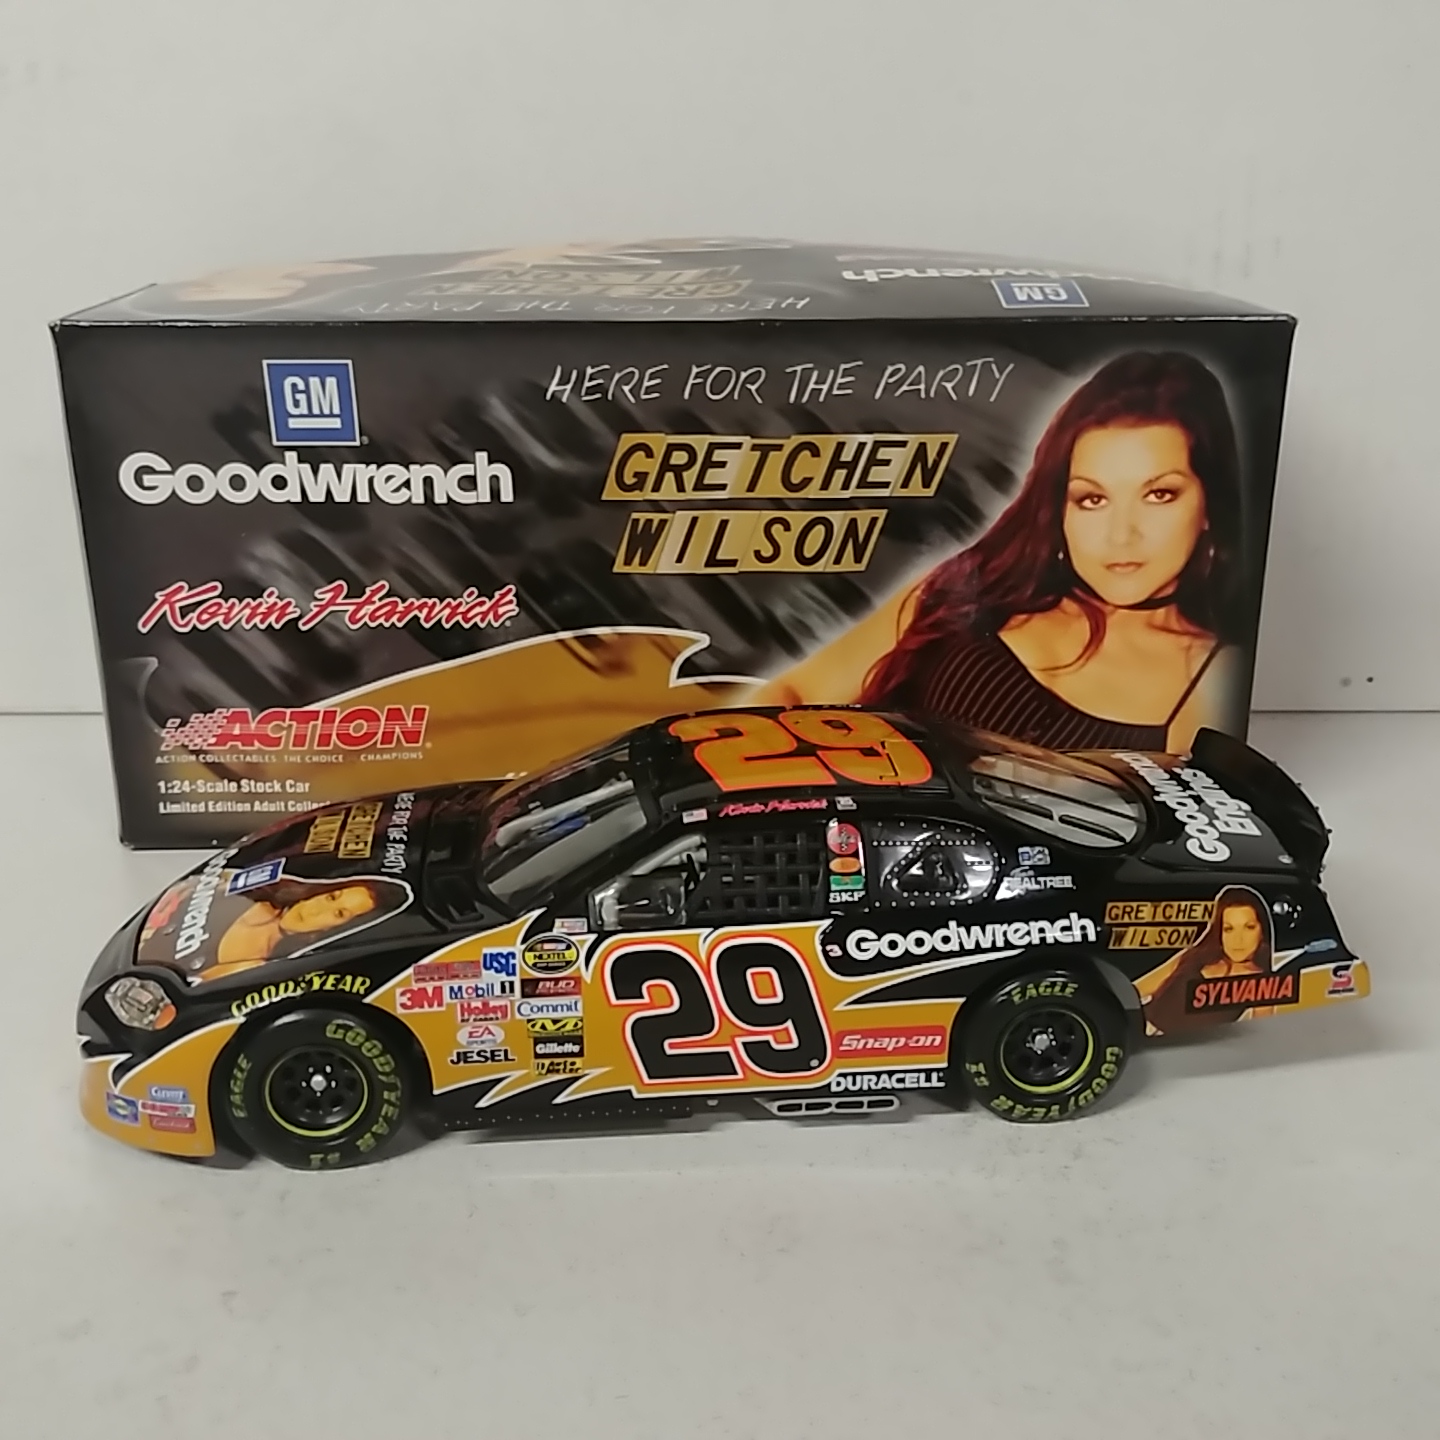 2005 Kevin Harvick 1/24th GM Goodwrench "Chevy Rock & Roll" c/w car